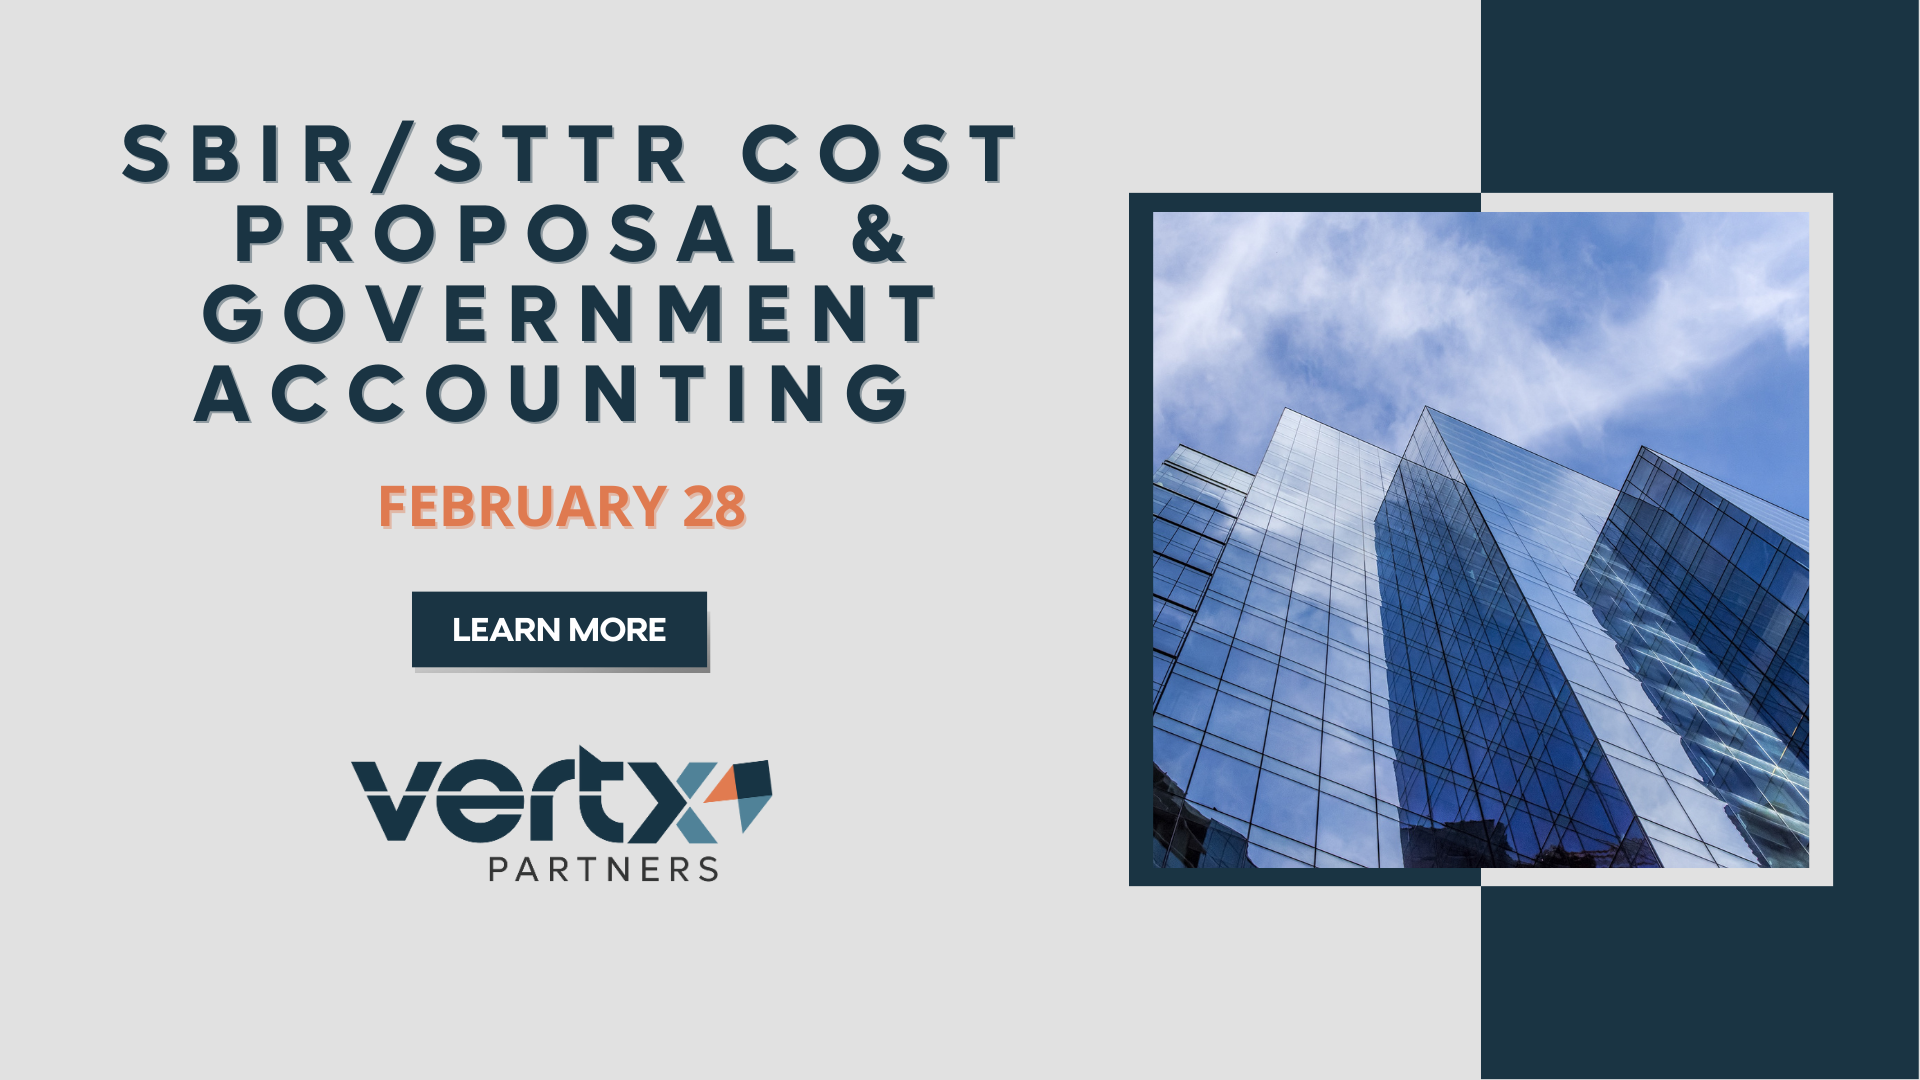 This graphic has the title "SBIR/STTR cost proposal and government accounting" with the date February 28th below it and a photo to the right of a building with a blue sky in the background.